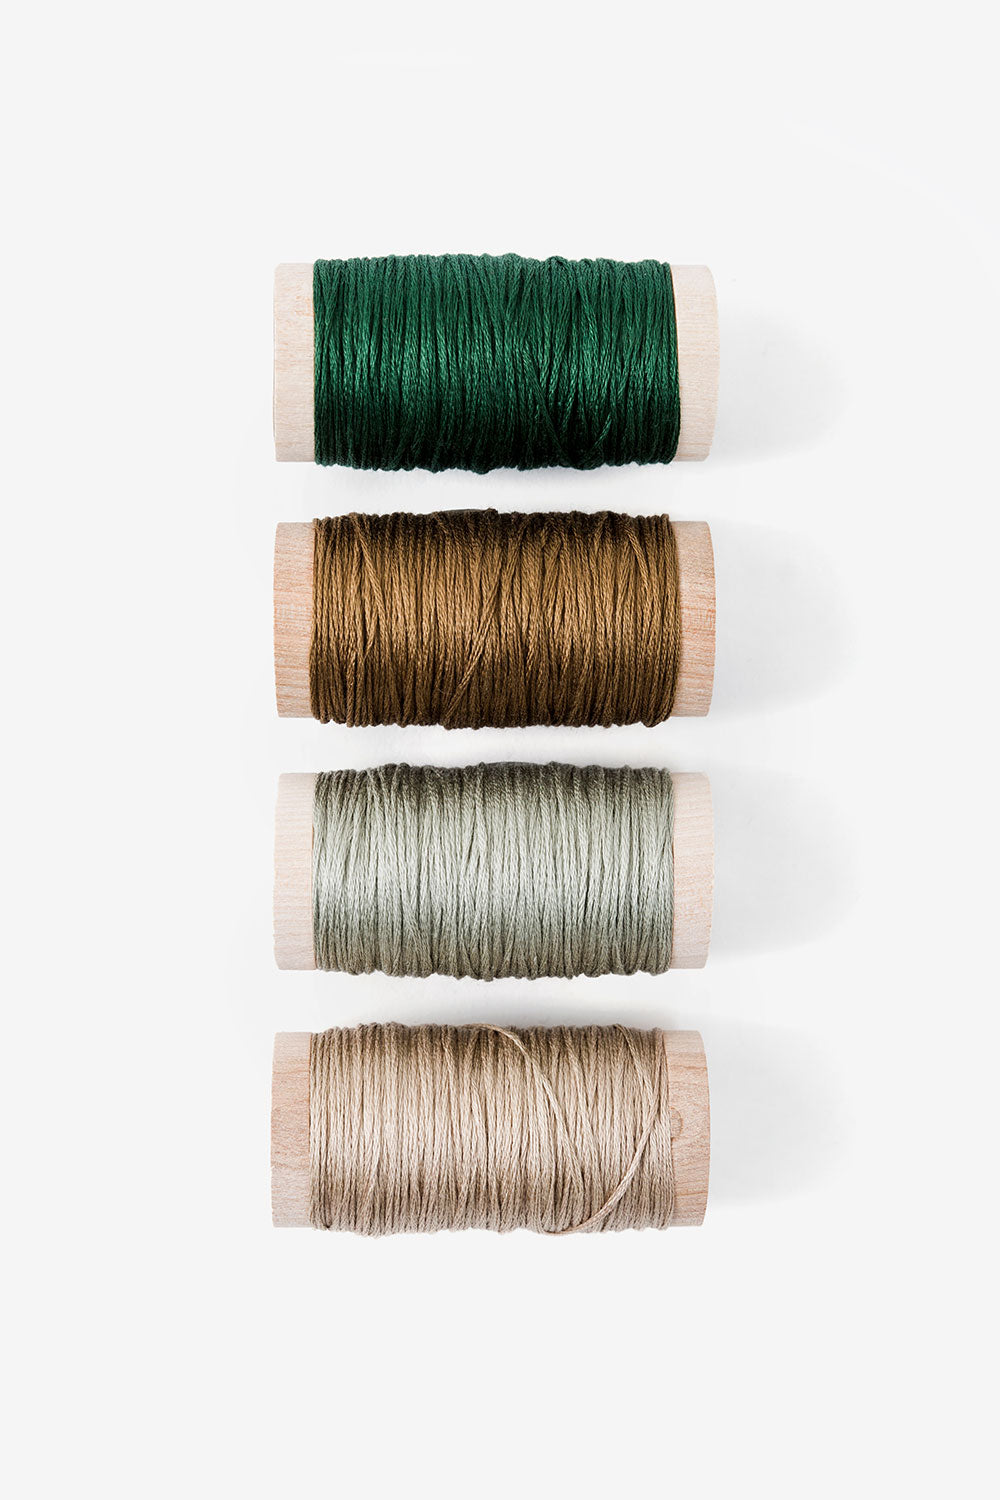 Four spools of embroidery floss in green and tan colors.